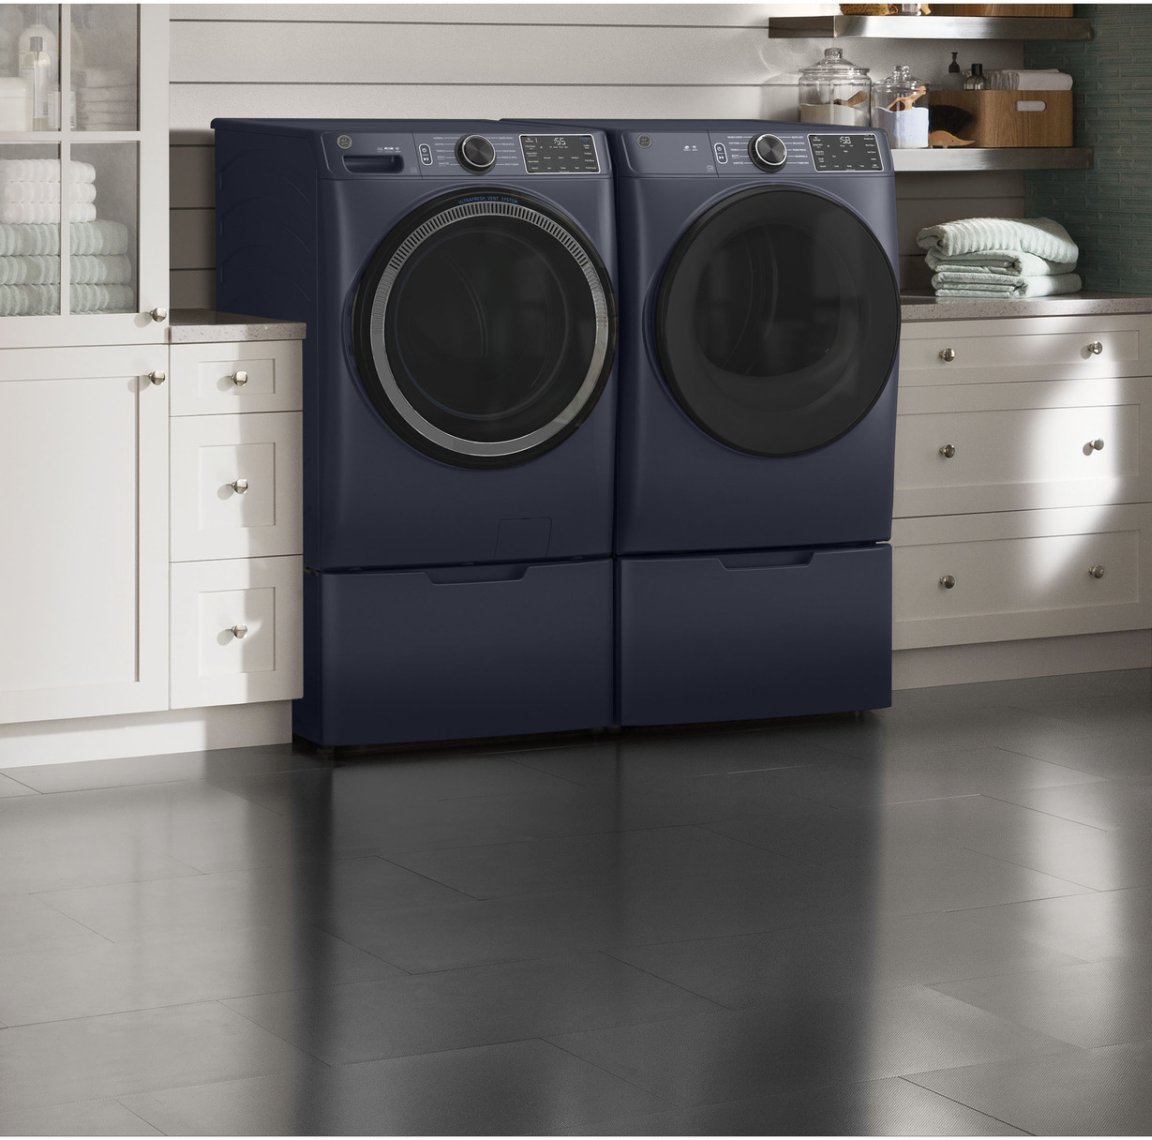 Sapphire blue GE front load washer and dryer in a laundry room with shiplap walls